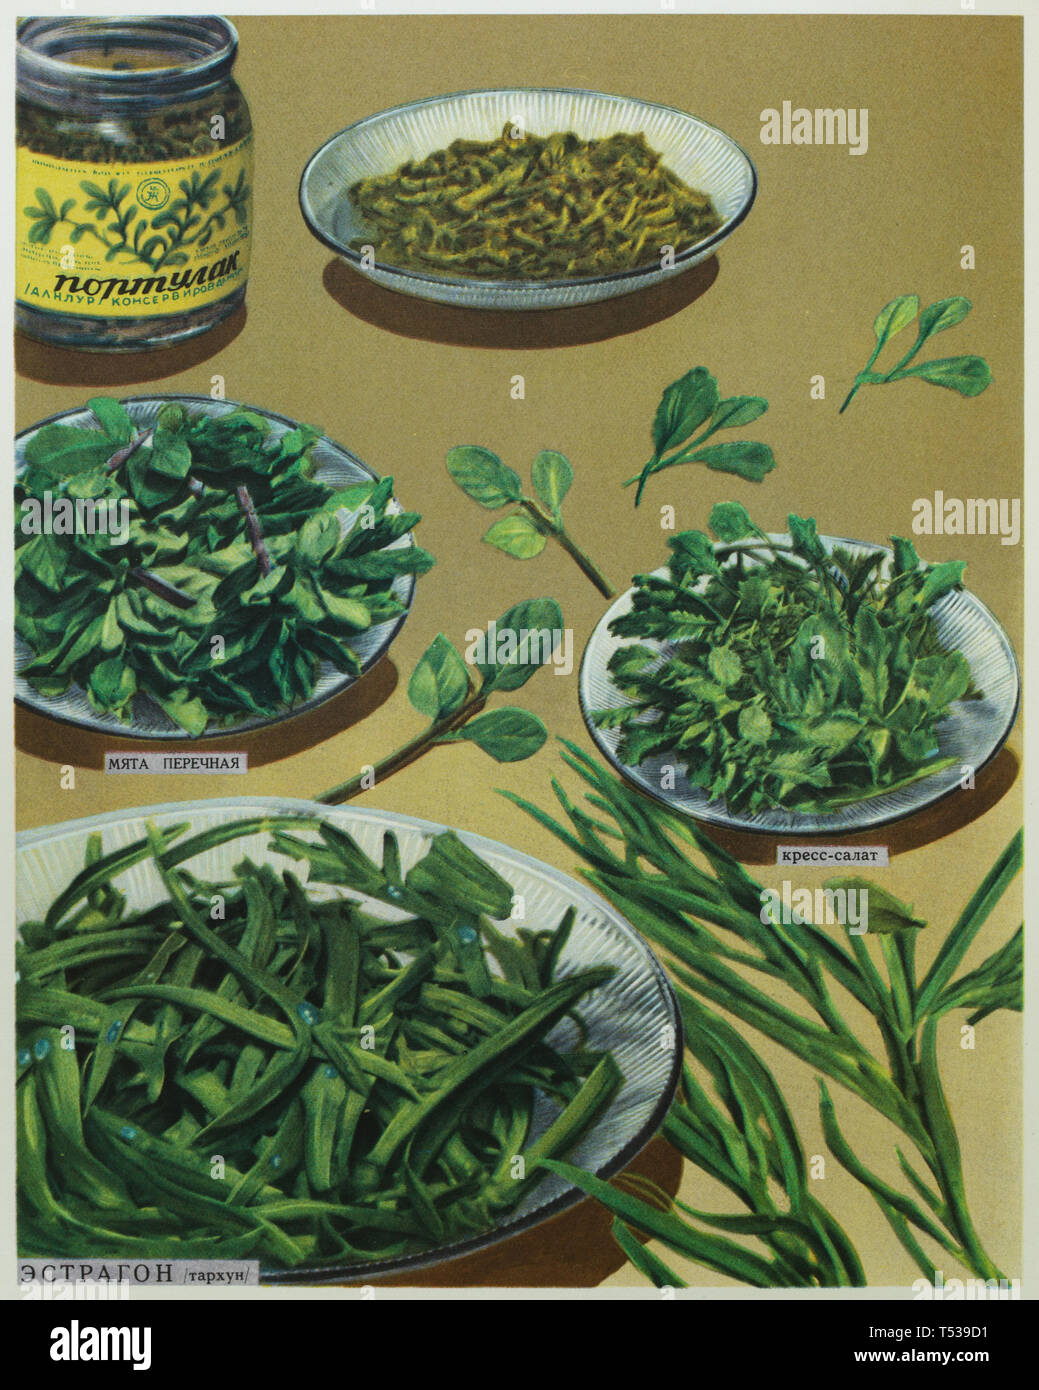 Tarragon, garden cress, peppermint and canned purslane depicted (from foreground to background) in the colour illustration in the Book of Tasty and Healthy Food published in the Soviet Union (1953). Stock Photo